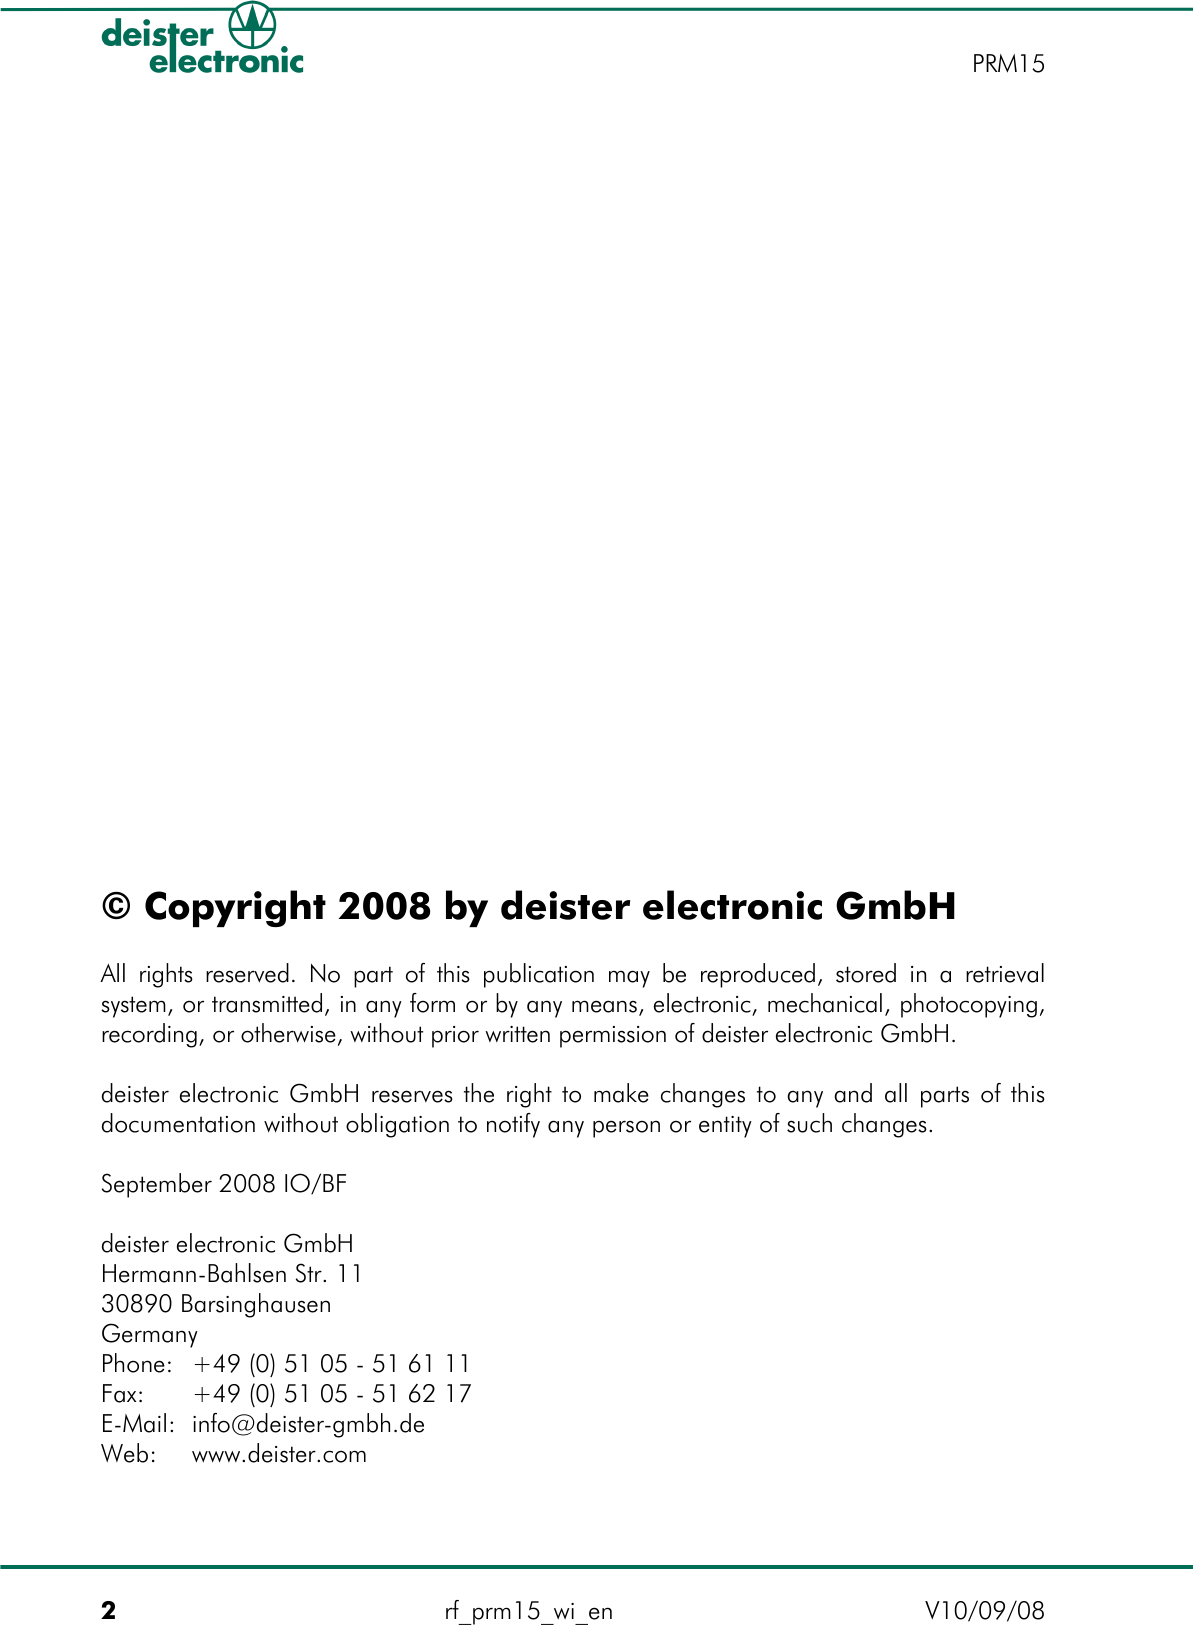 © Copyright 2008 by deister electronic GmbHAll rights reserved. No part of this publication may be reproduced, stored in a retrieval system, or transmitted, in any form or by any means, electronic, mechanical, photocopying, recording, or otherwise, without prior written permission of deister electronic GmbH.deister electronic GmbH reserves the right to make changes to any and all parts of this documentation without obligation to notify any person or entity of such changes.September 2008 IO/BFdeister electronic GmbHHermann-Bahlsen Str. 11 30890 BarsinghausenGermanyPhone: +49 (0) 51 05 - 51 61 11Fax: +49 (0) 51 05 - 51 62 17E-Mail: info@deister-gmbh.deWeb: www.deister.com 2rf_prm15_wi_en V10/09/08PRM15